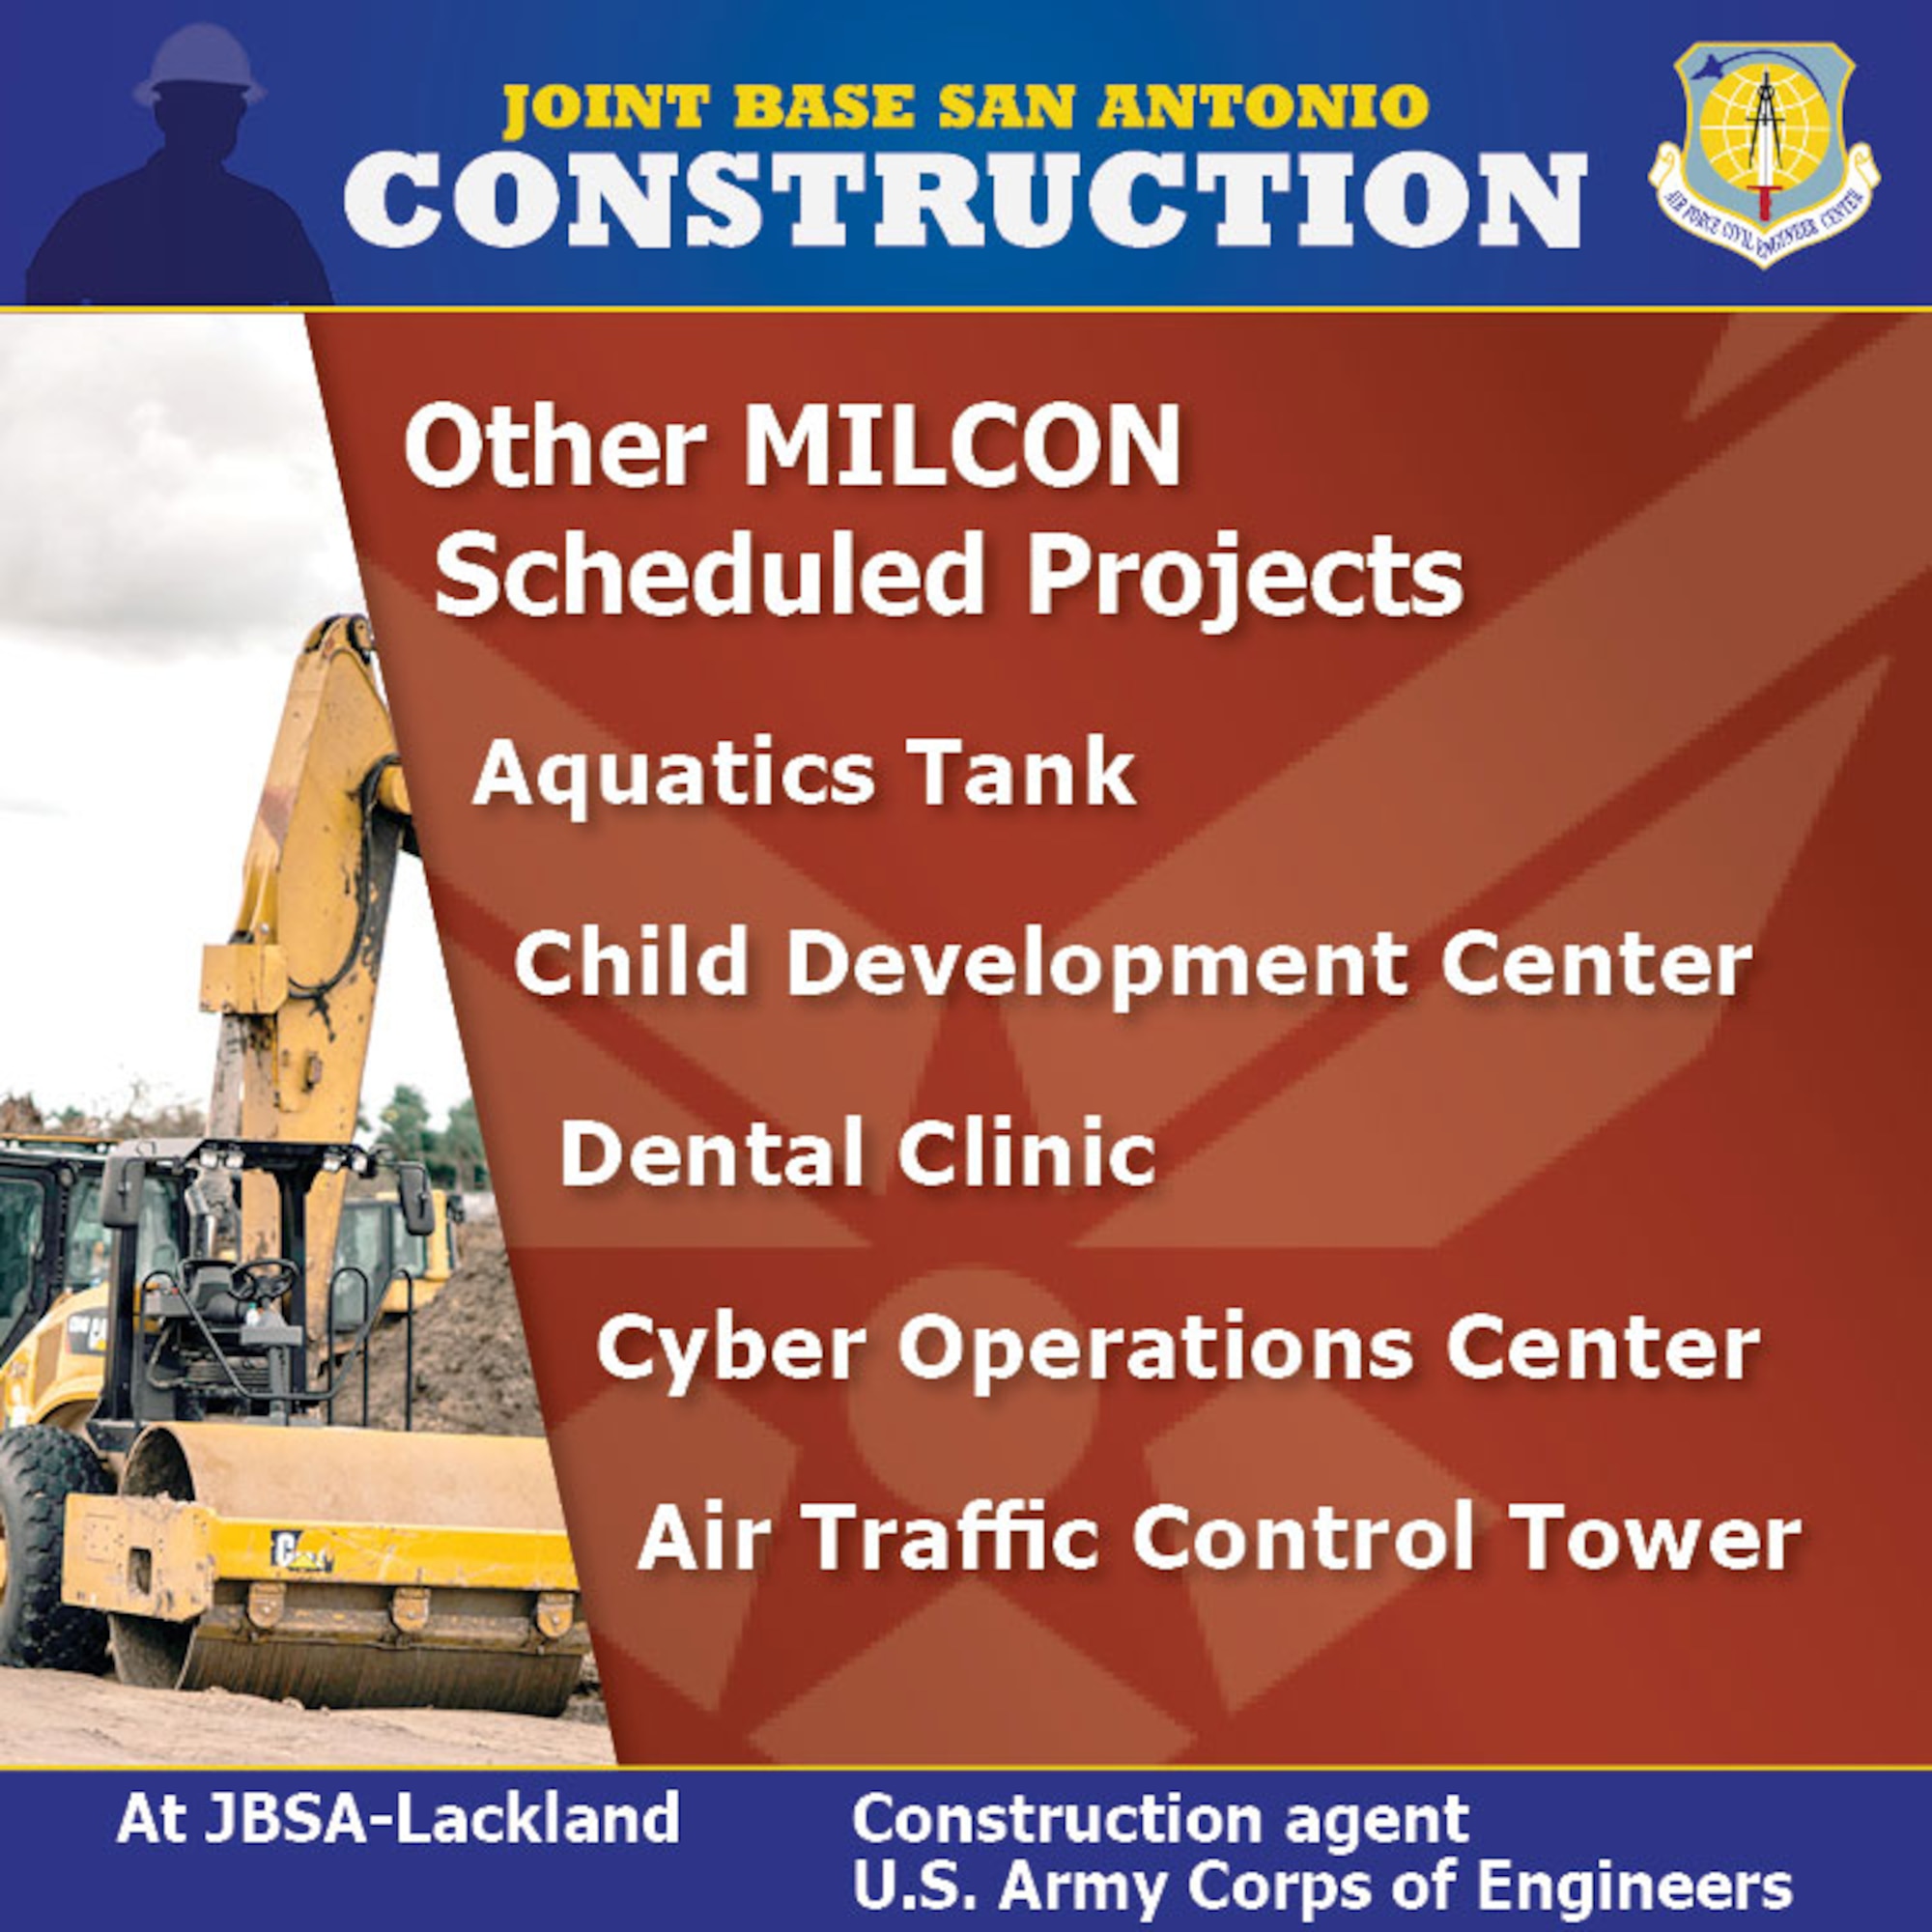 graphic for construction at Joint Base San Antonio, Texas.